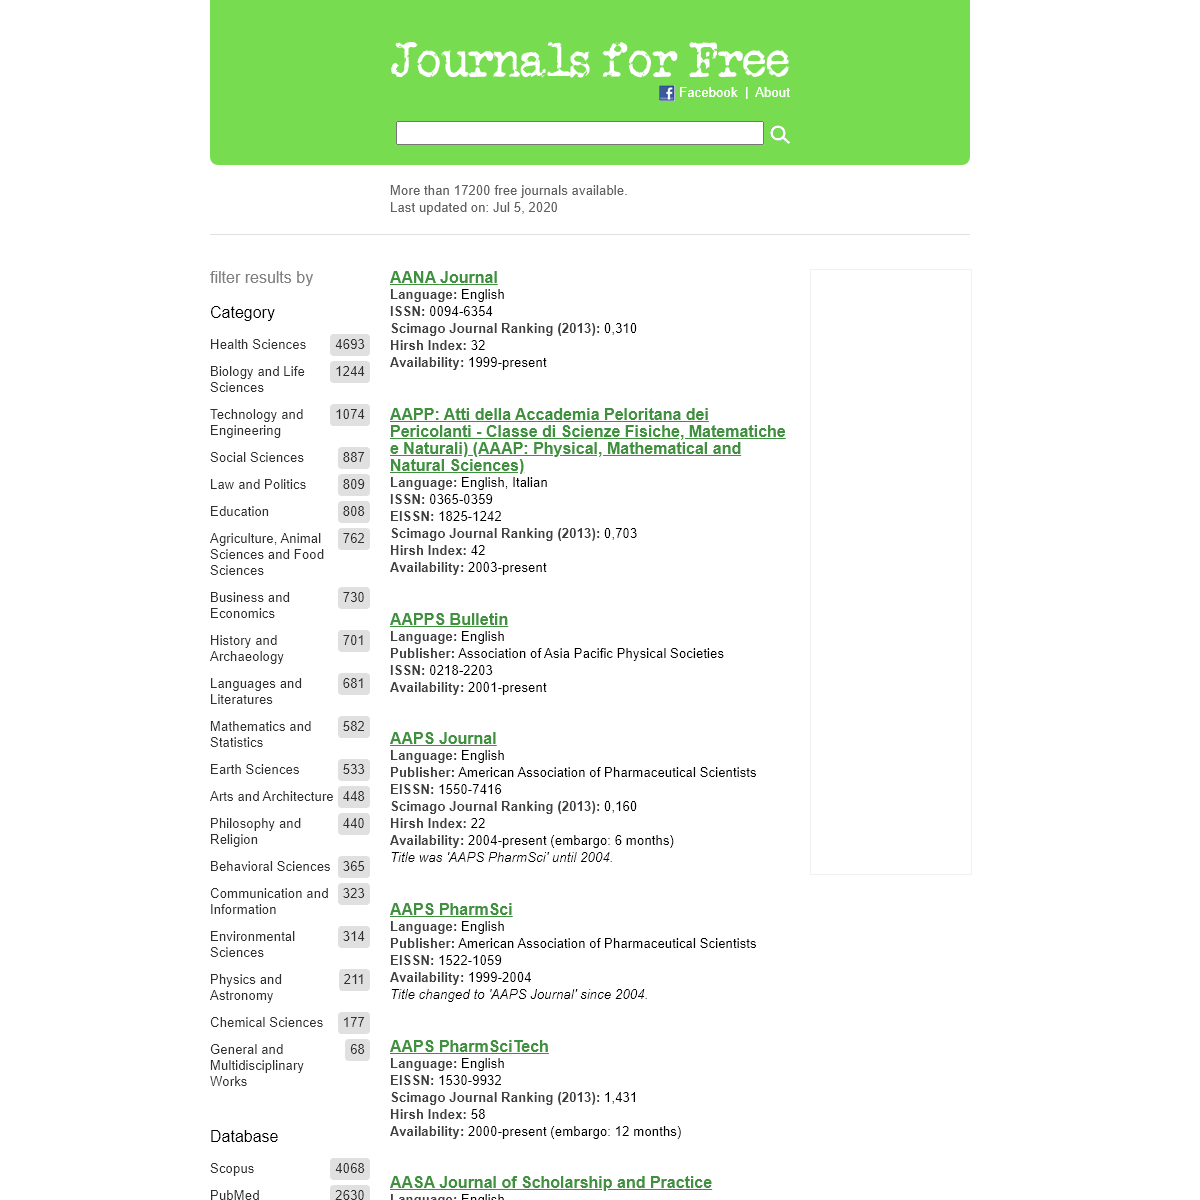 A complete backup of journals4free.com